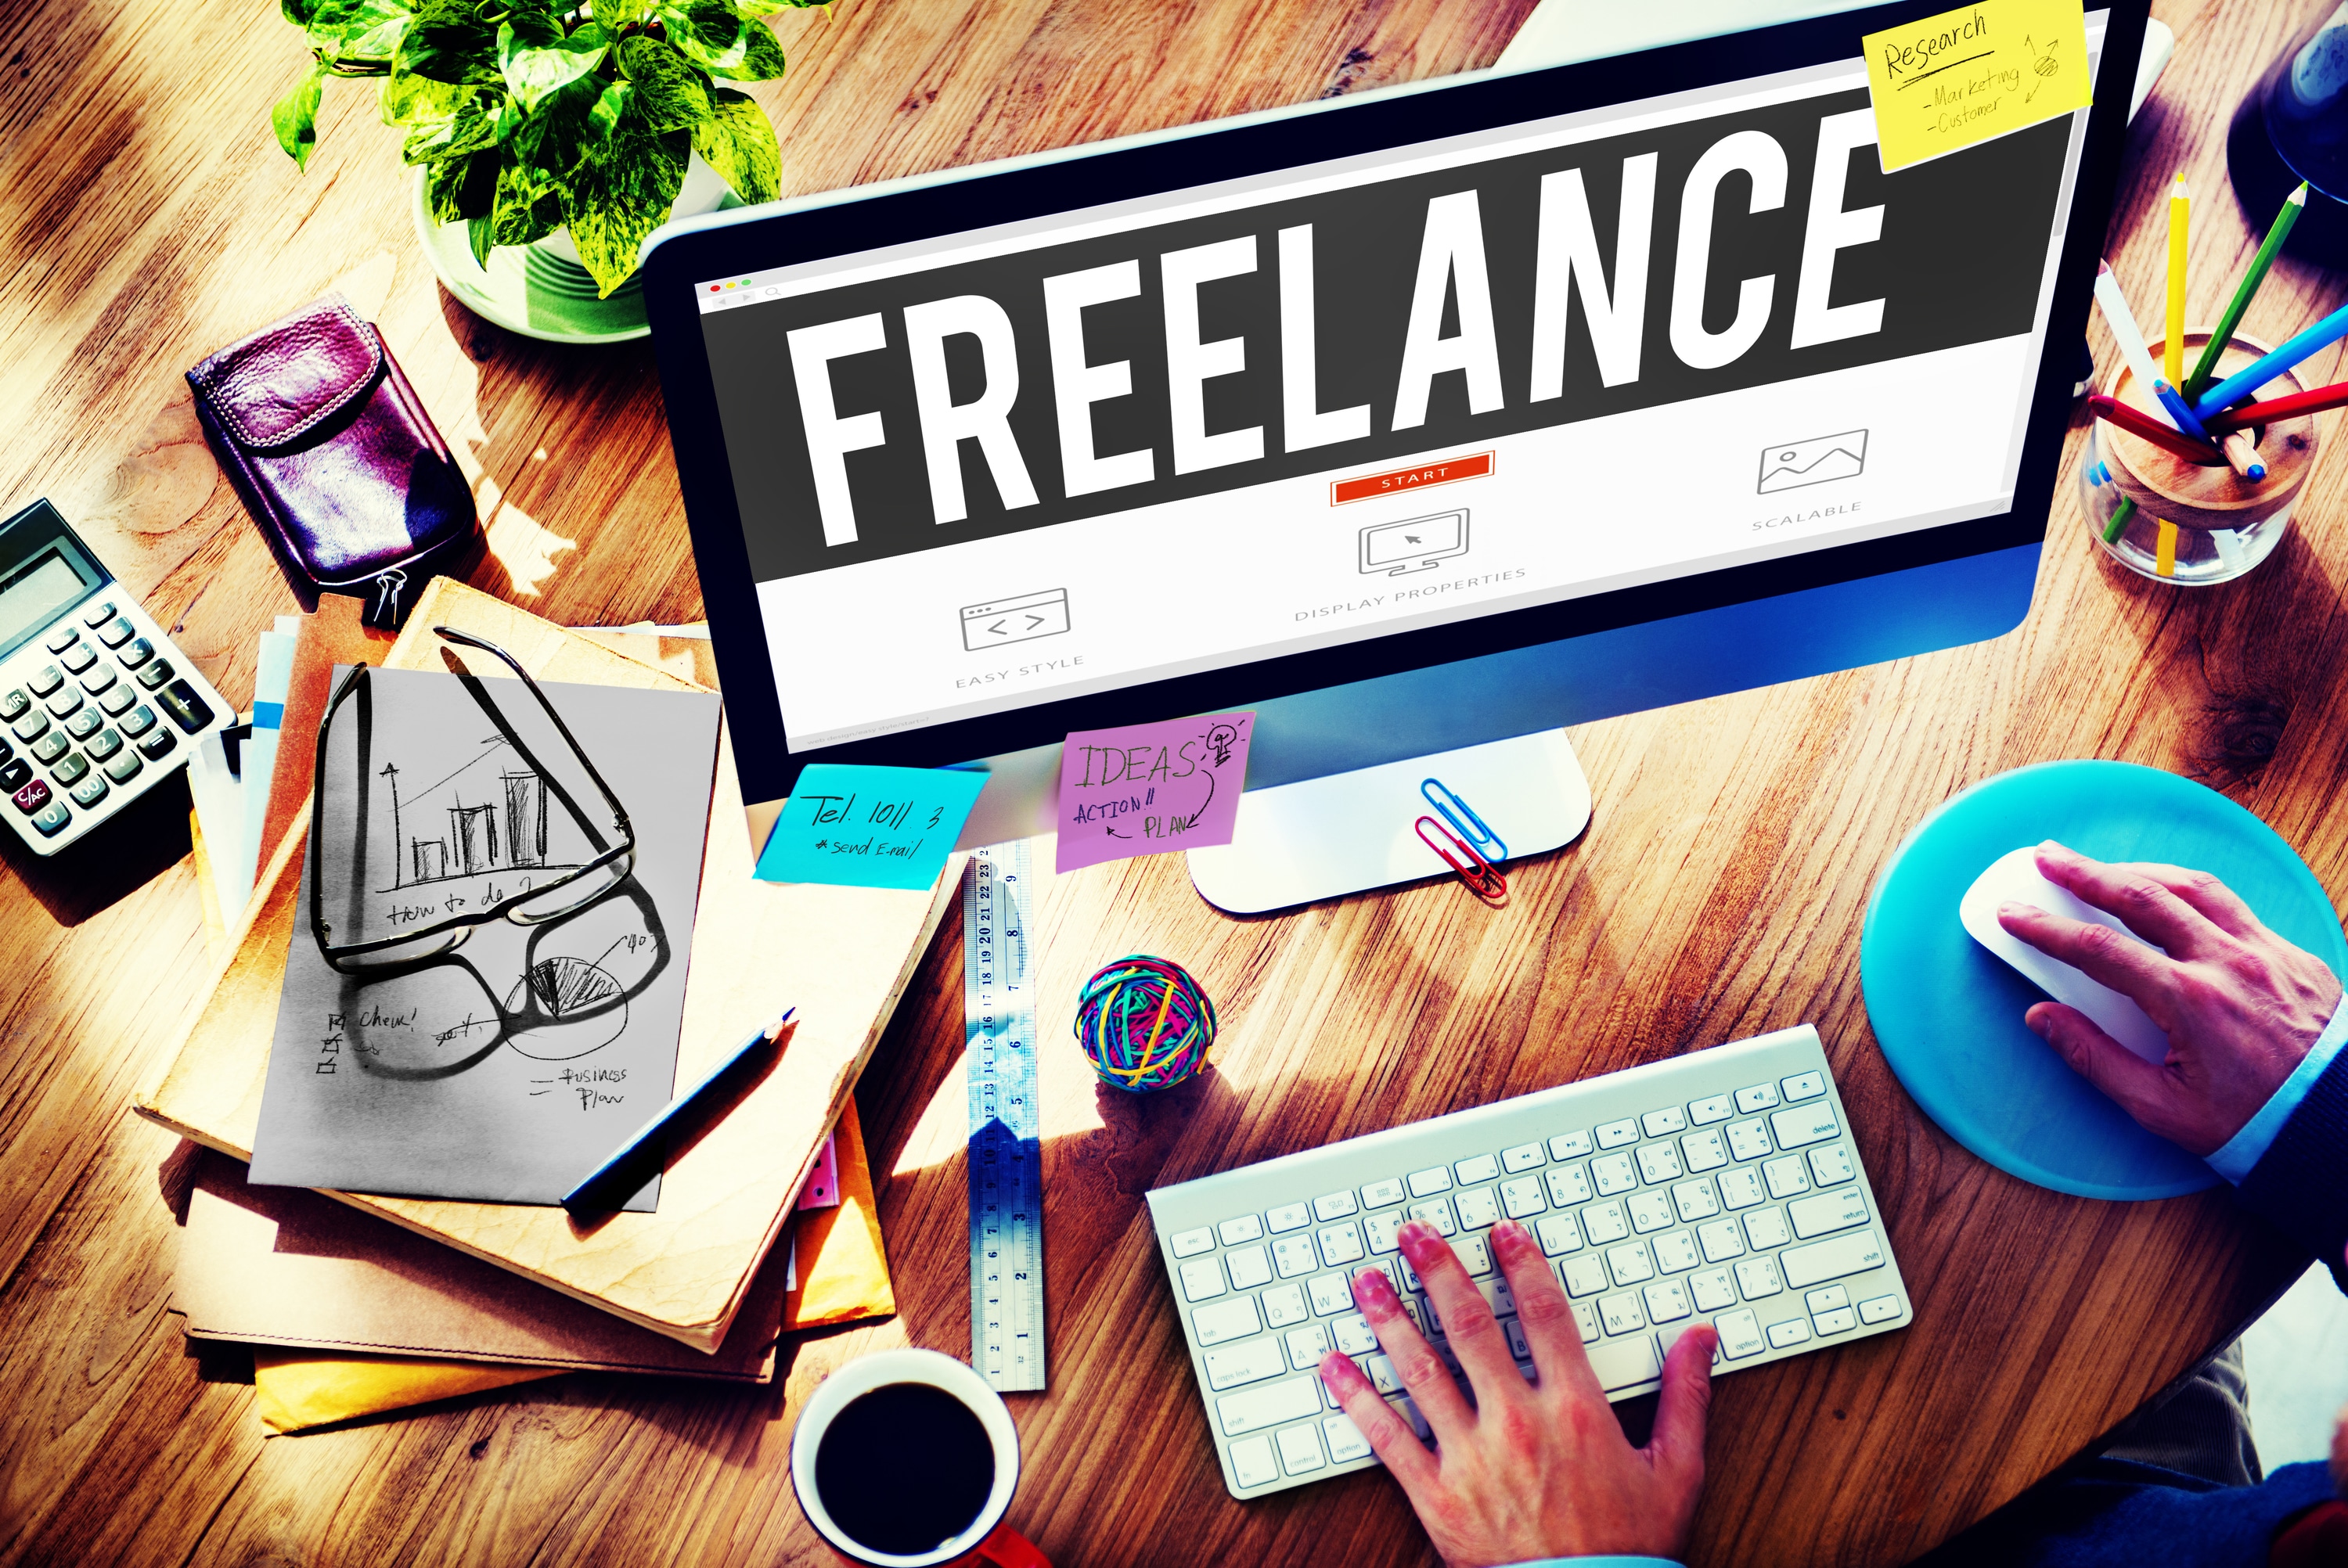 How to grab freelance project